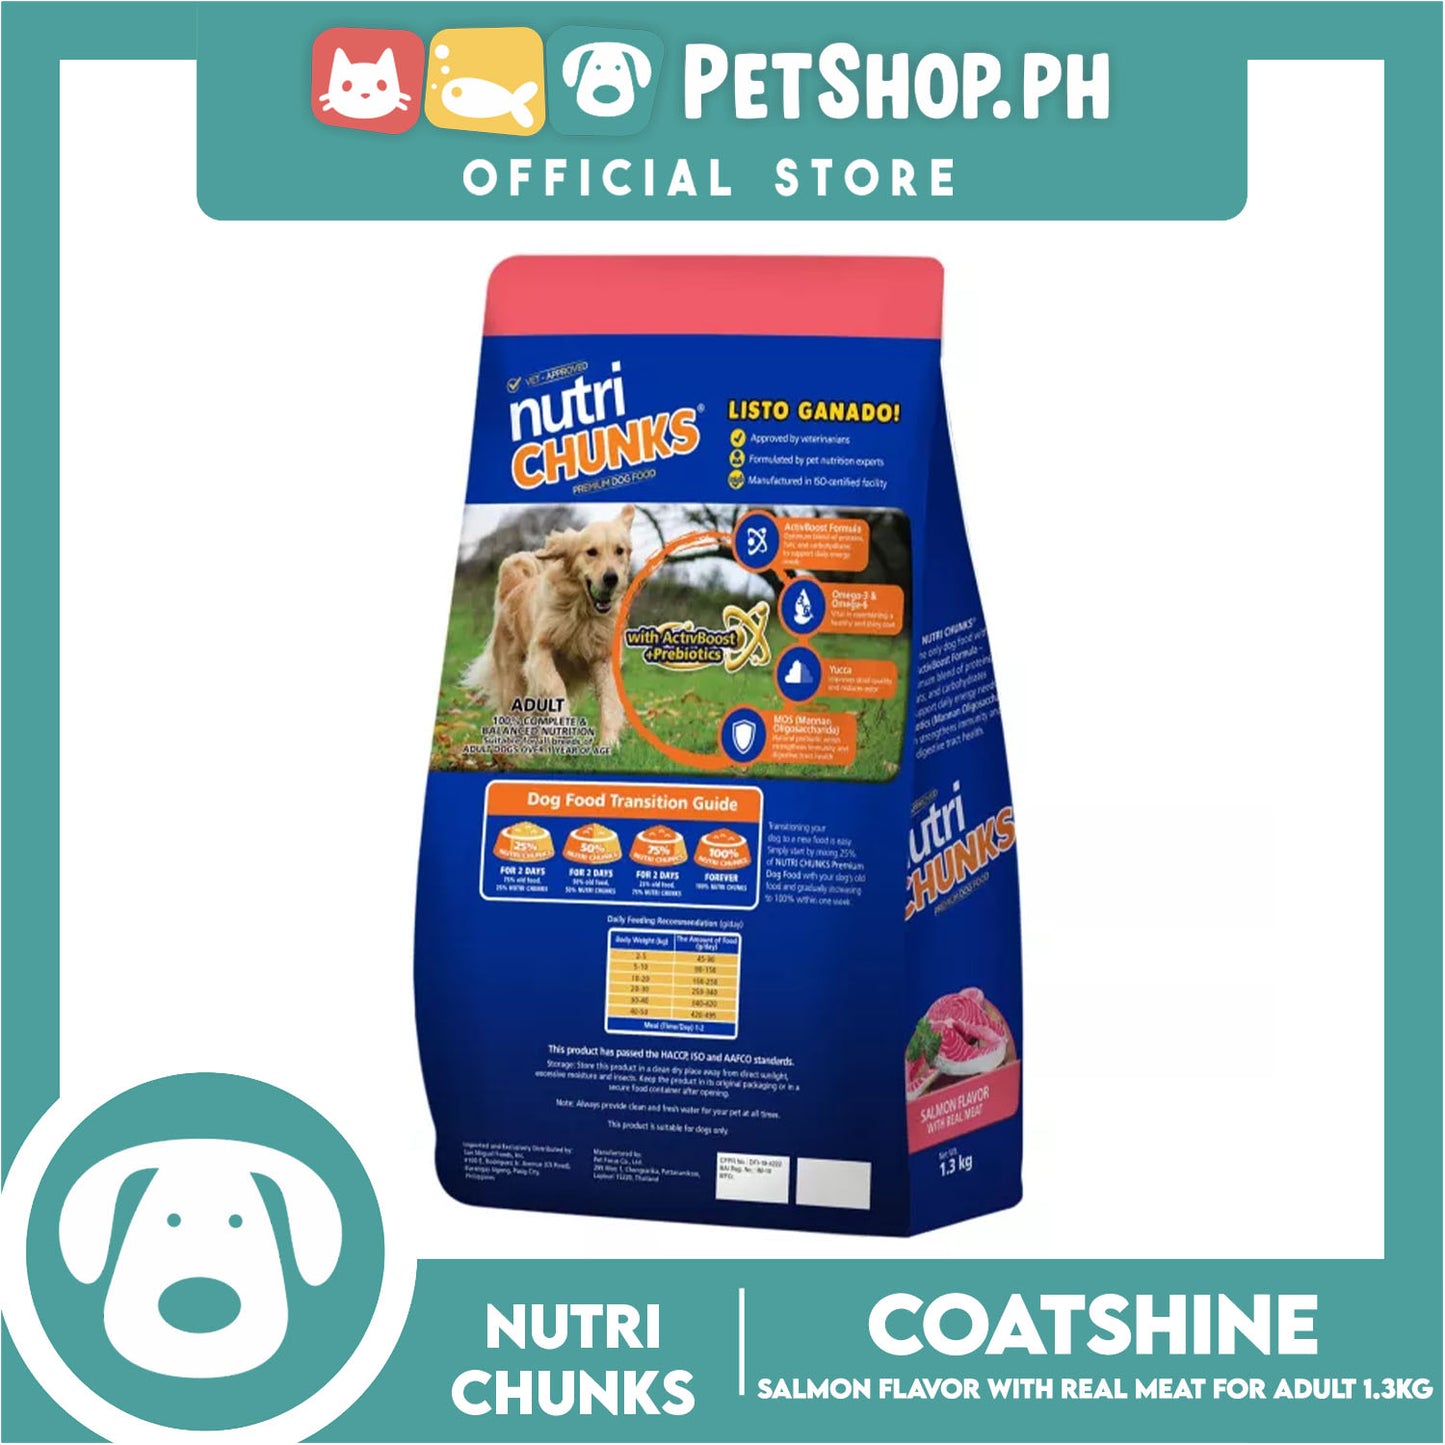 Nutri Chunks Coatshine Premium Dog Food, Adult For All Breeds 1.3kg (Salmon Flavor With Real Meat) 100% Complete And Balanced Nutrition, Dog Food